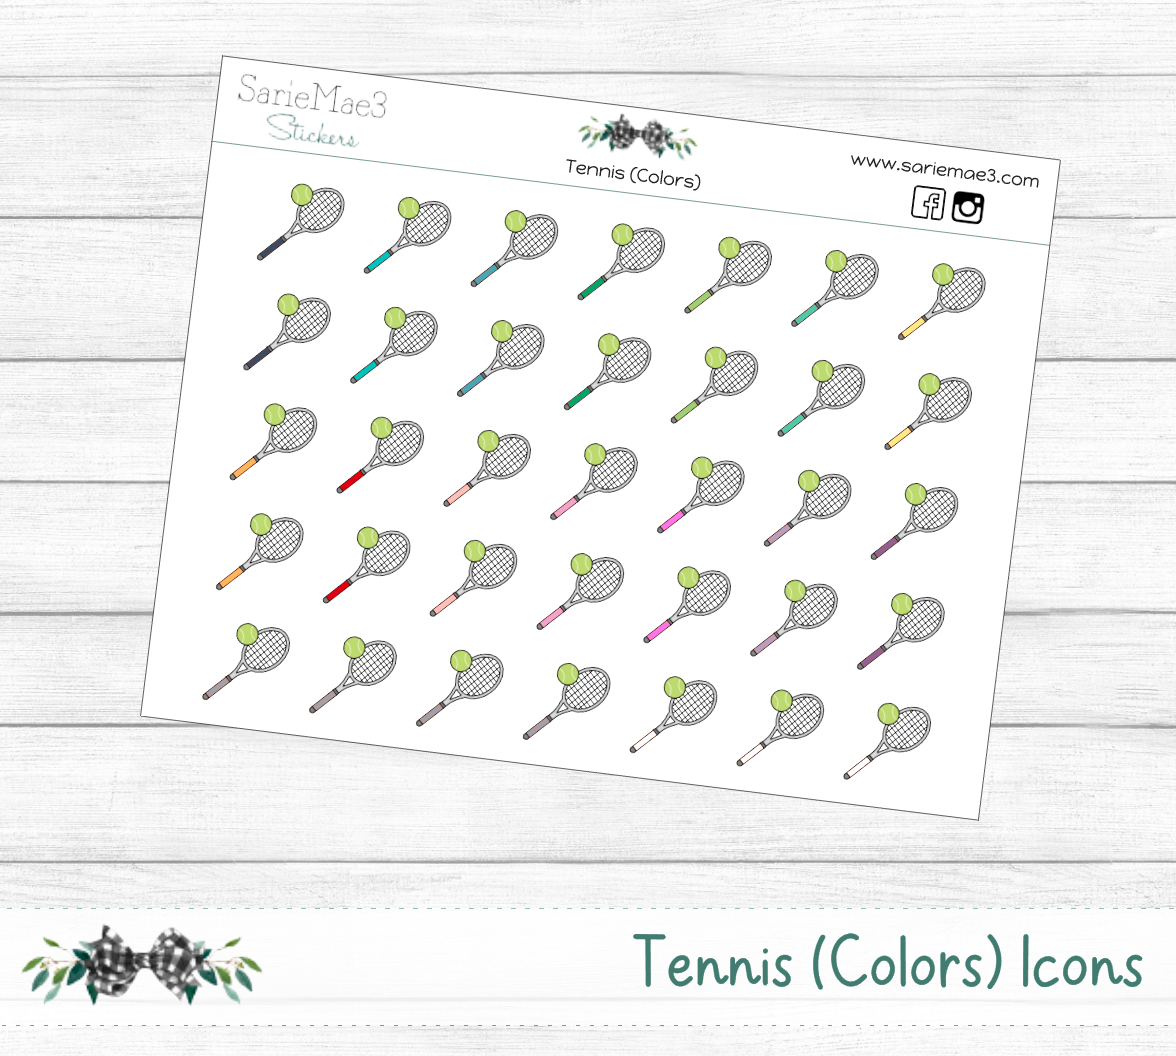 Tennis (Colors) Icons